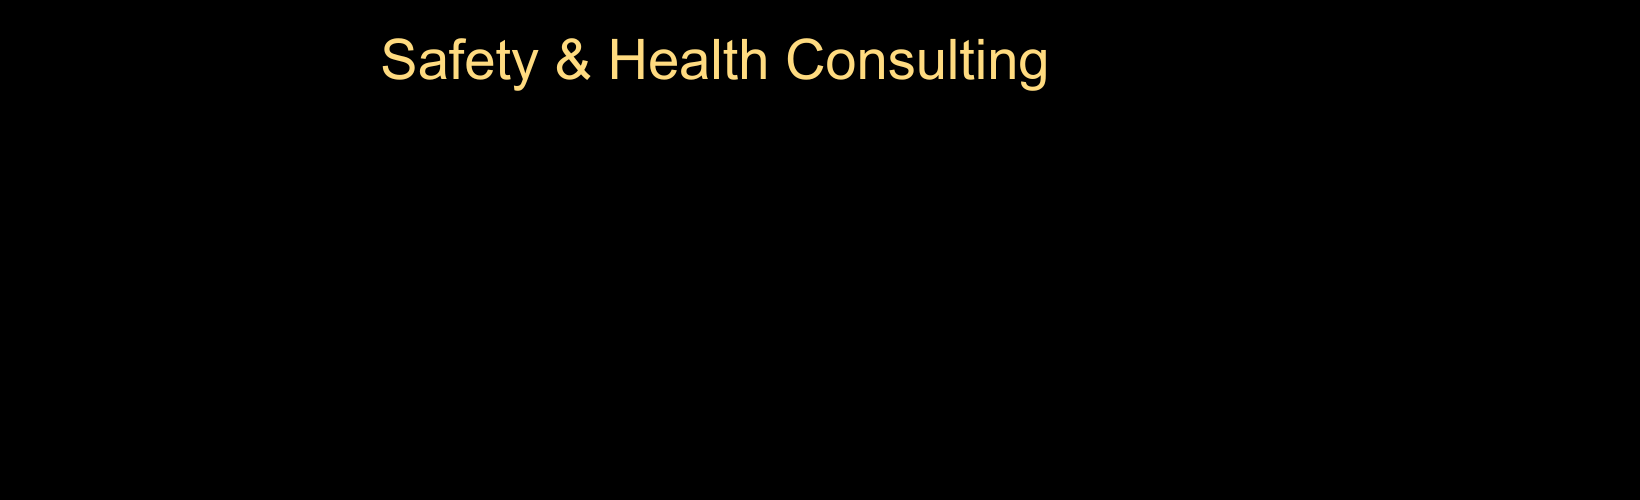 Safety & Health Consulting